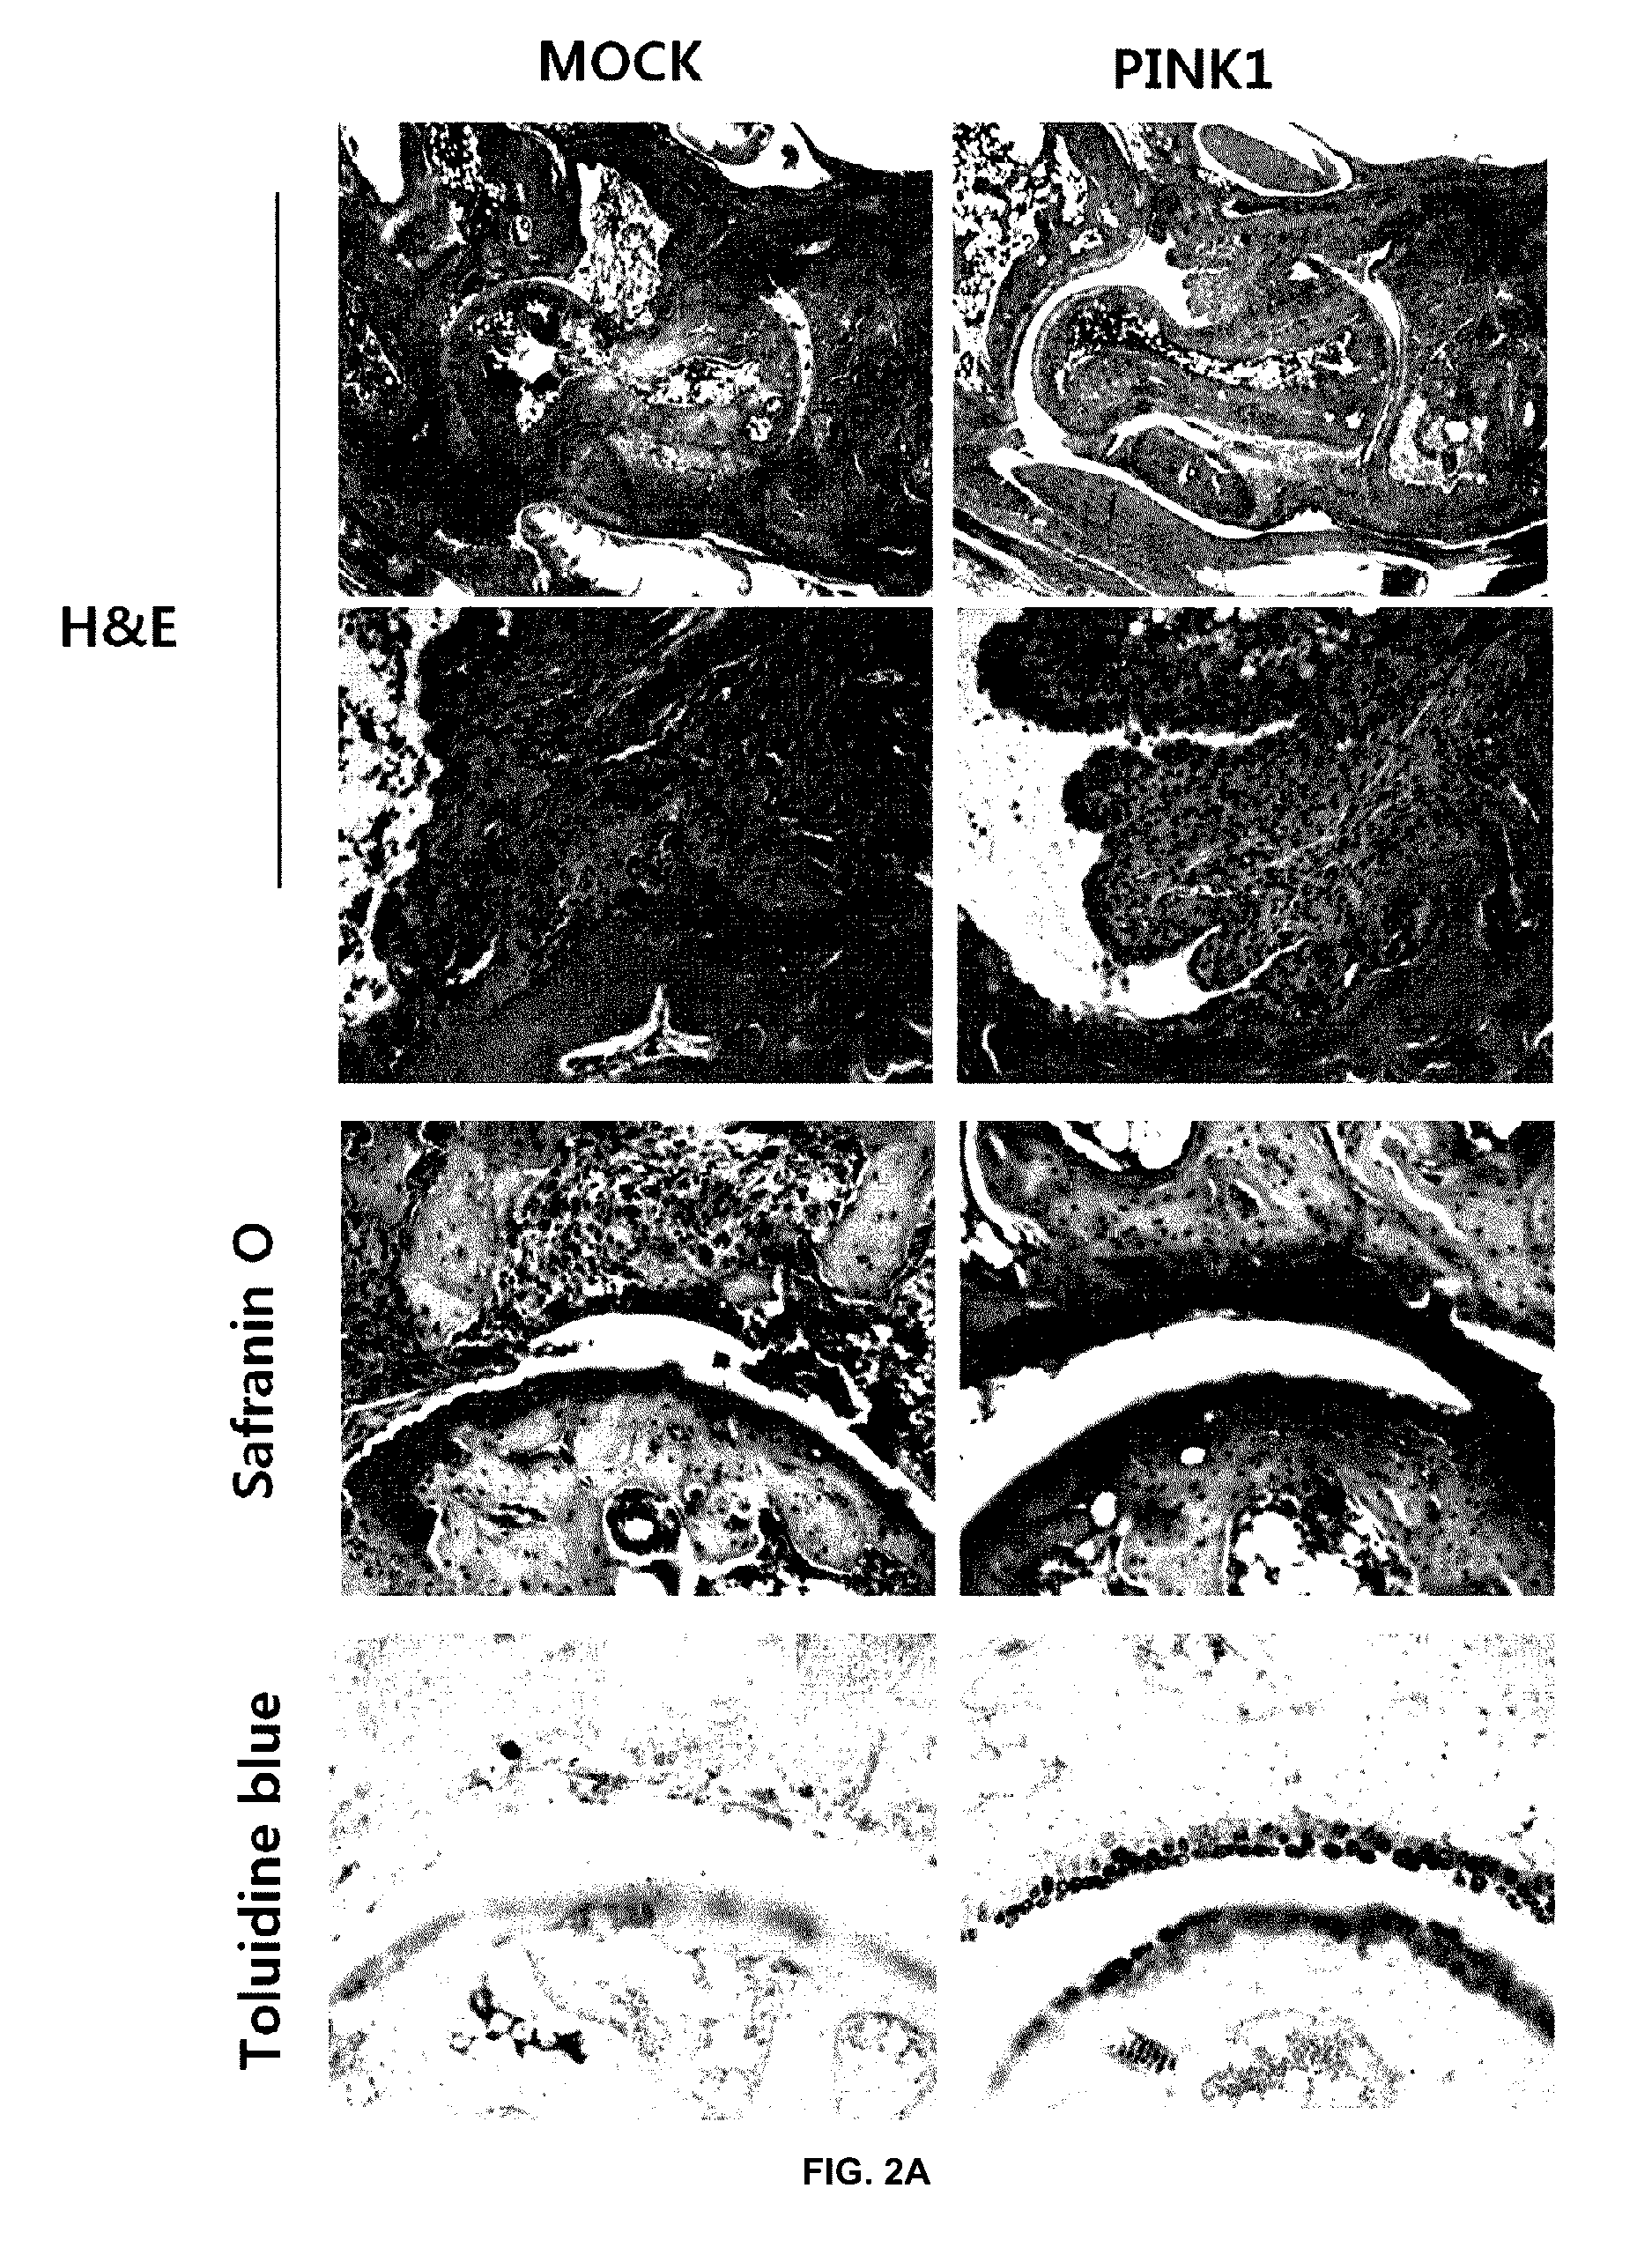 Composition for preventing or treating autoimmune disease, comprising, as active ingredient, PINK1 protein or polynucleotide encoding same